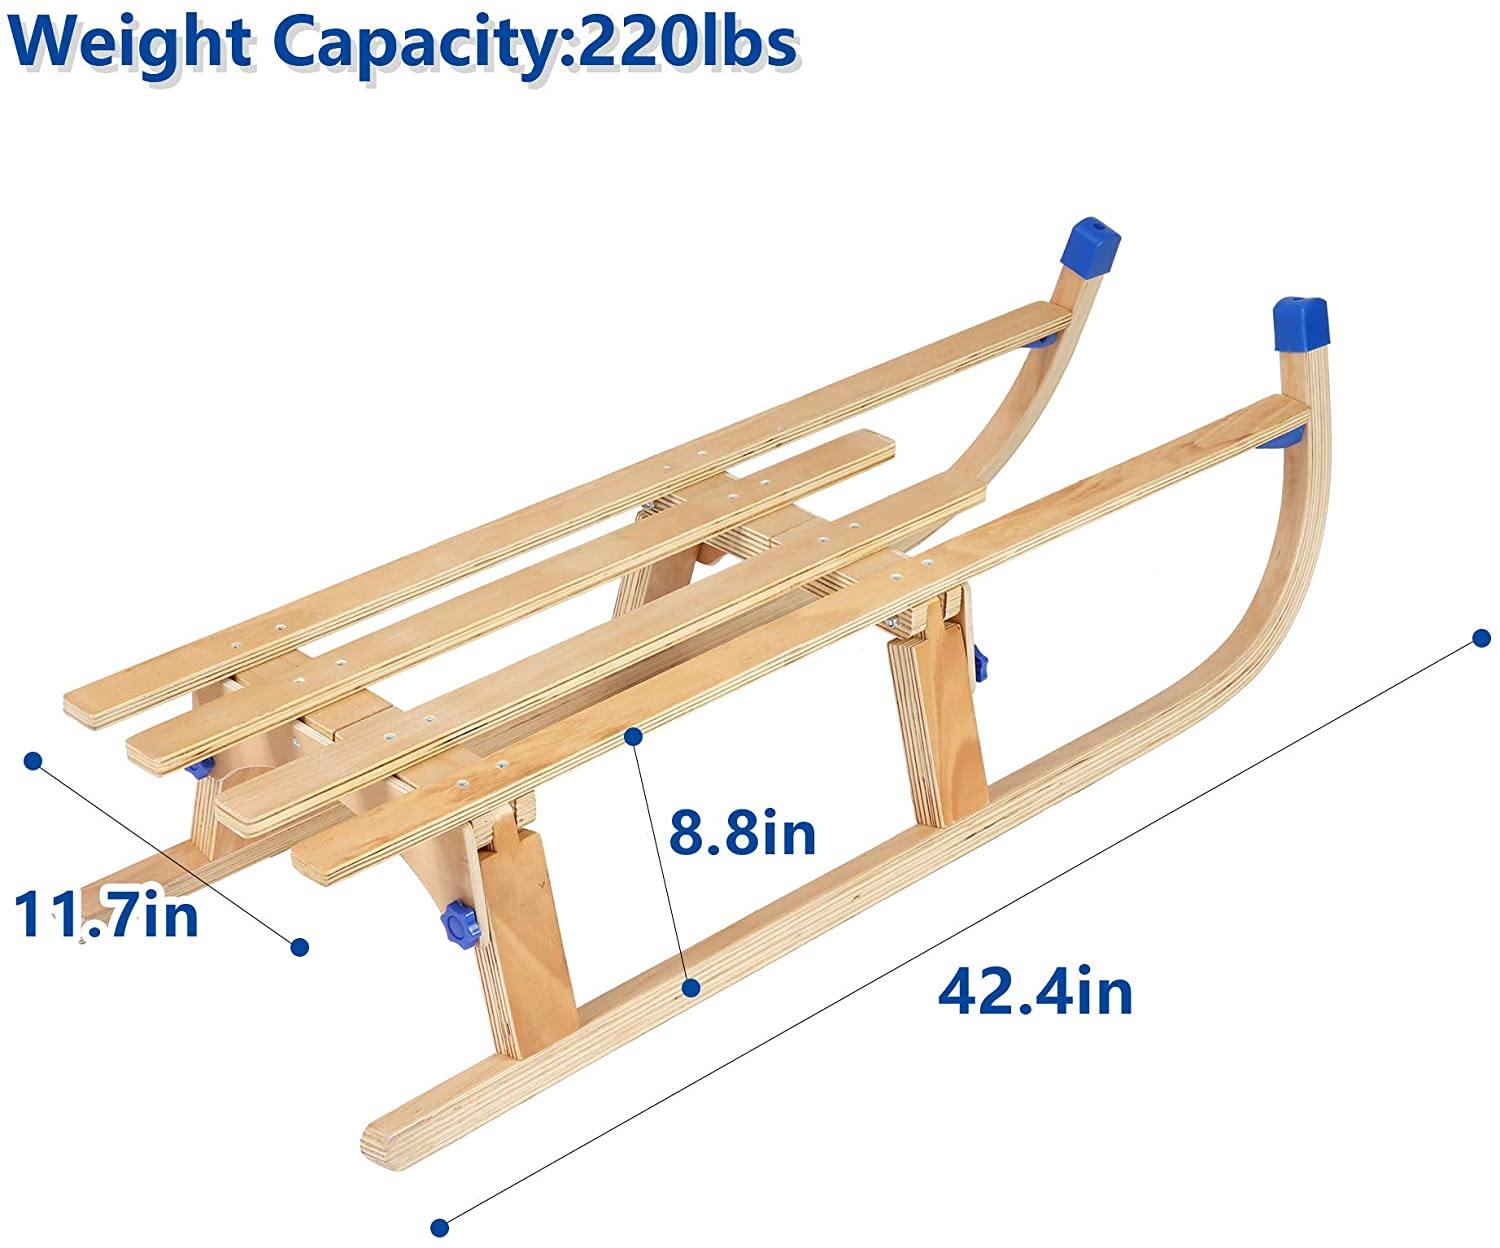 Sled Wooden Foldable For Kids And Adult Outdoor Play With A Pulling Rope 42 inch Weight Capacity With Blue Bracket, 220lbs - Bosonshop